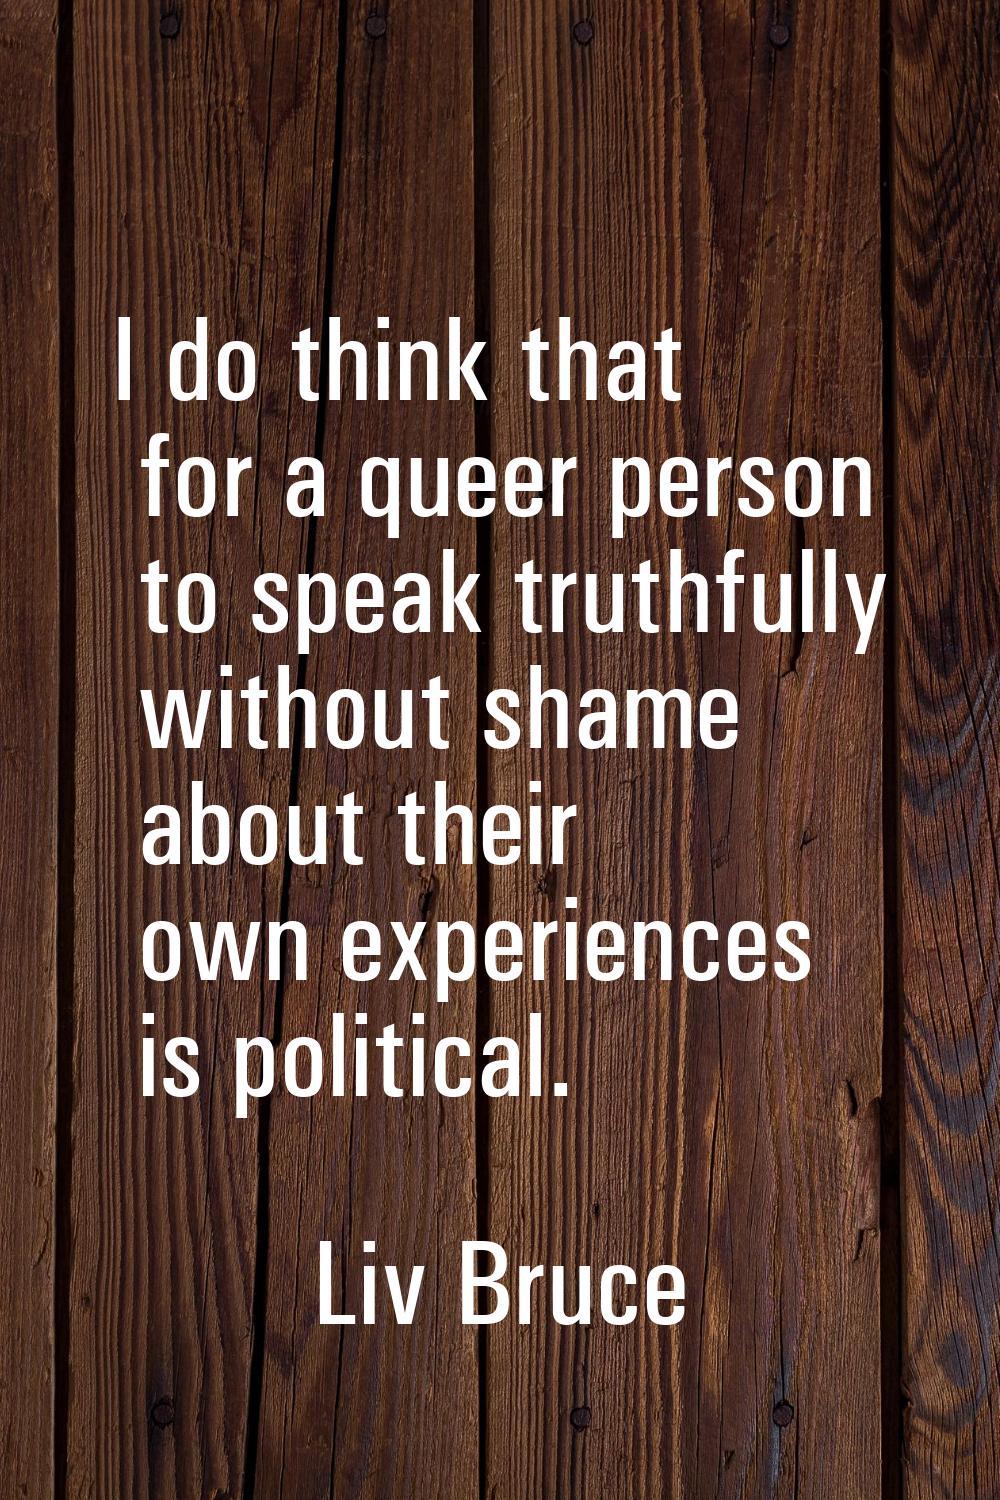 I do think that for a queer person to speak truthfully without shame about their own experiences is